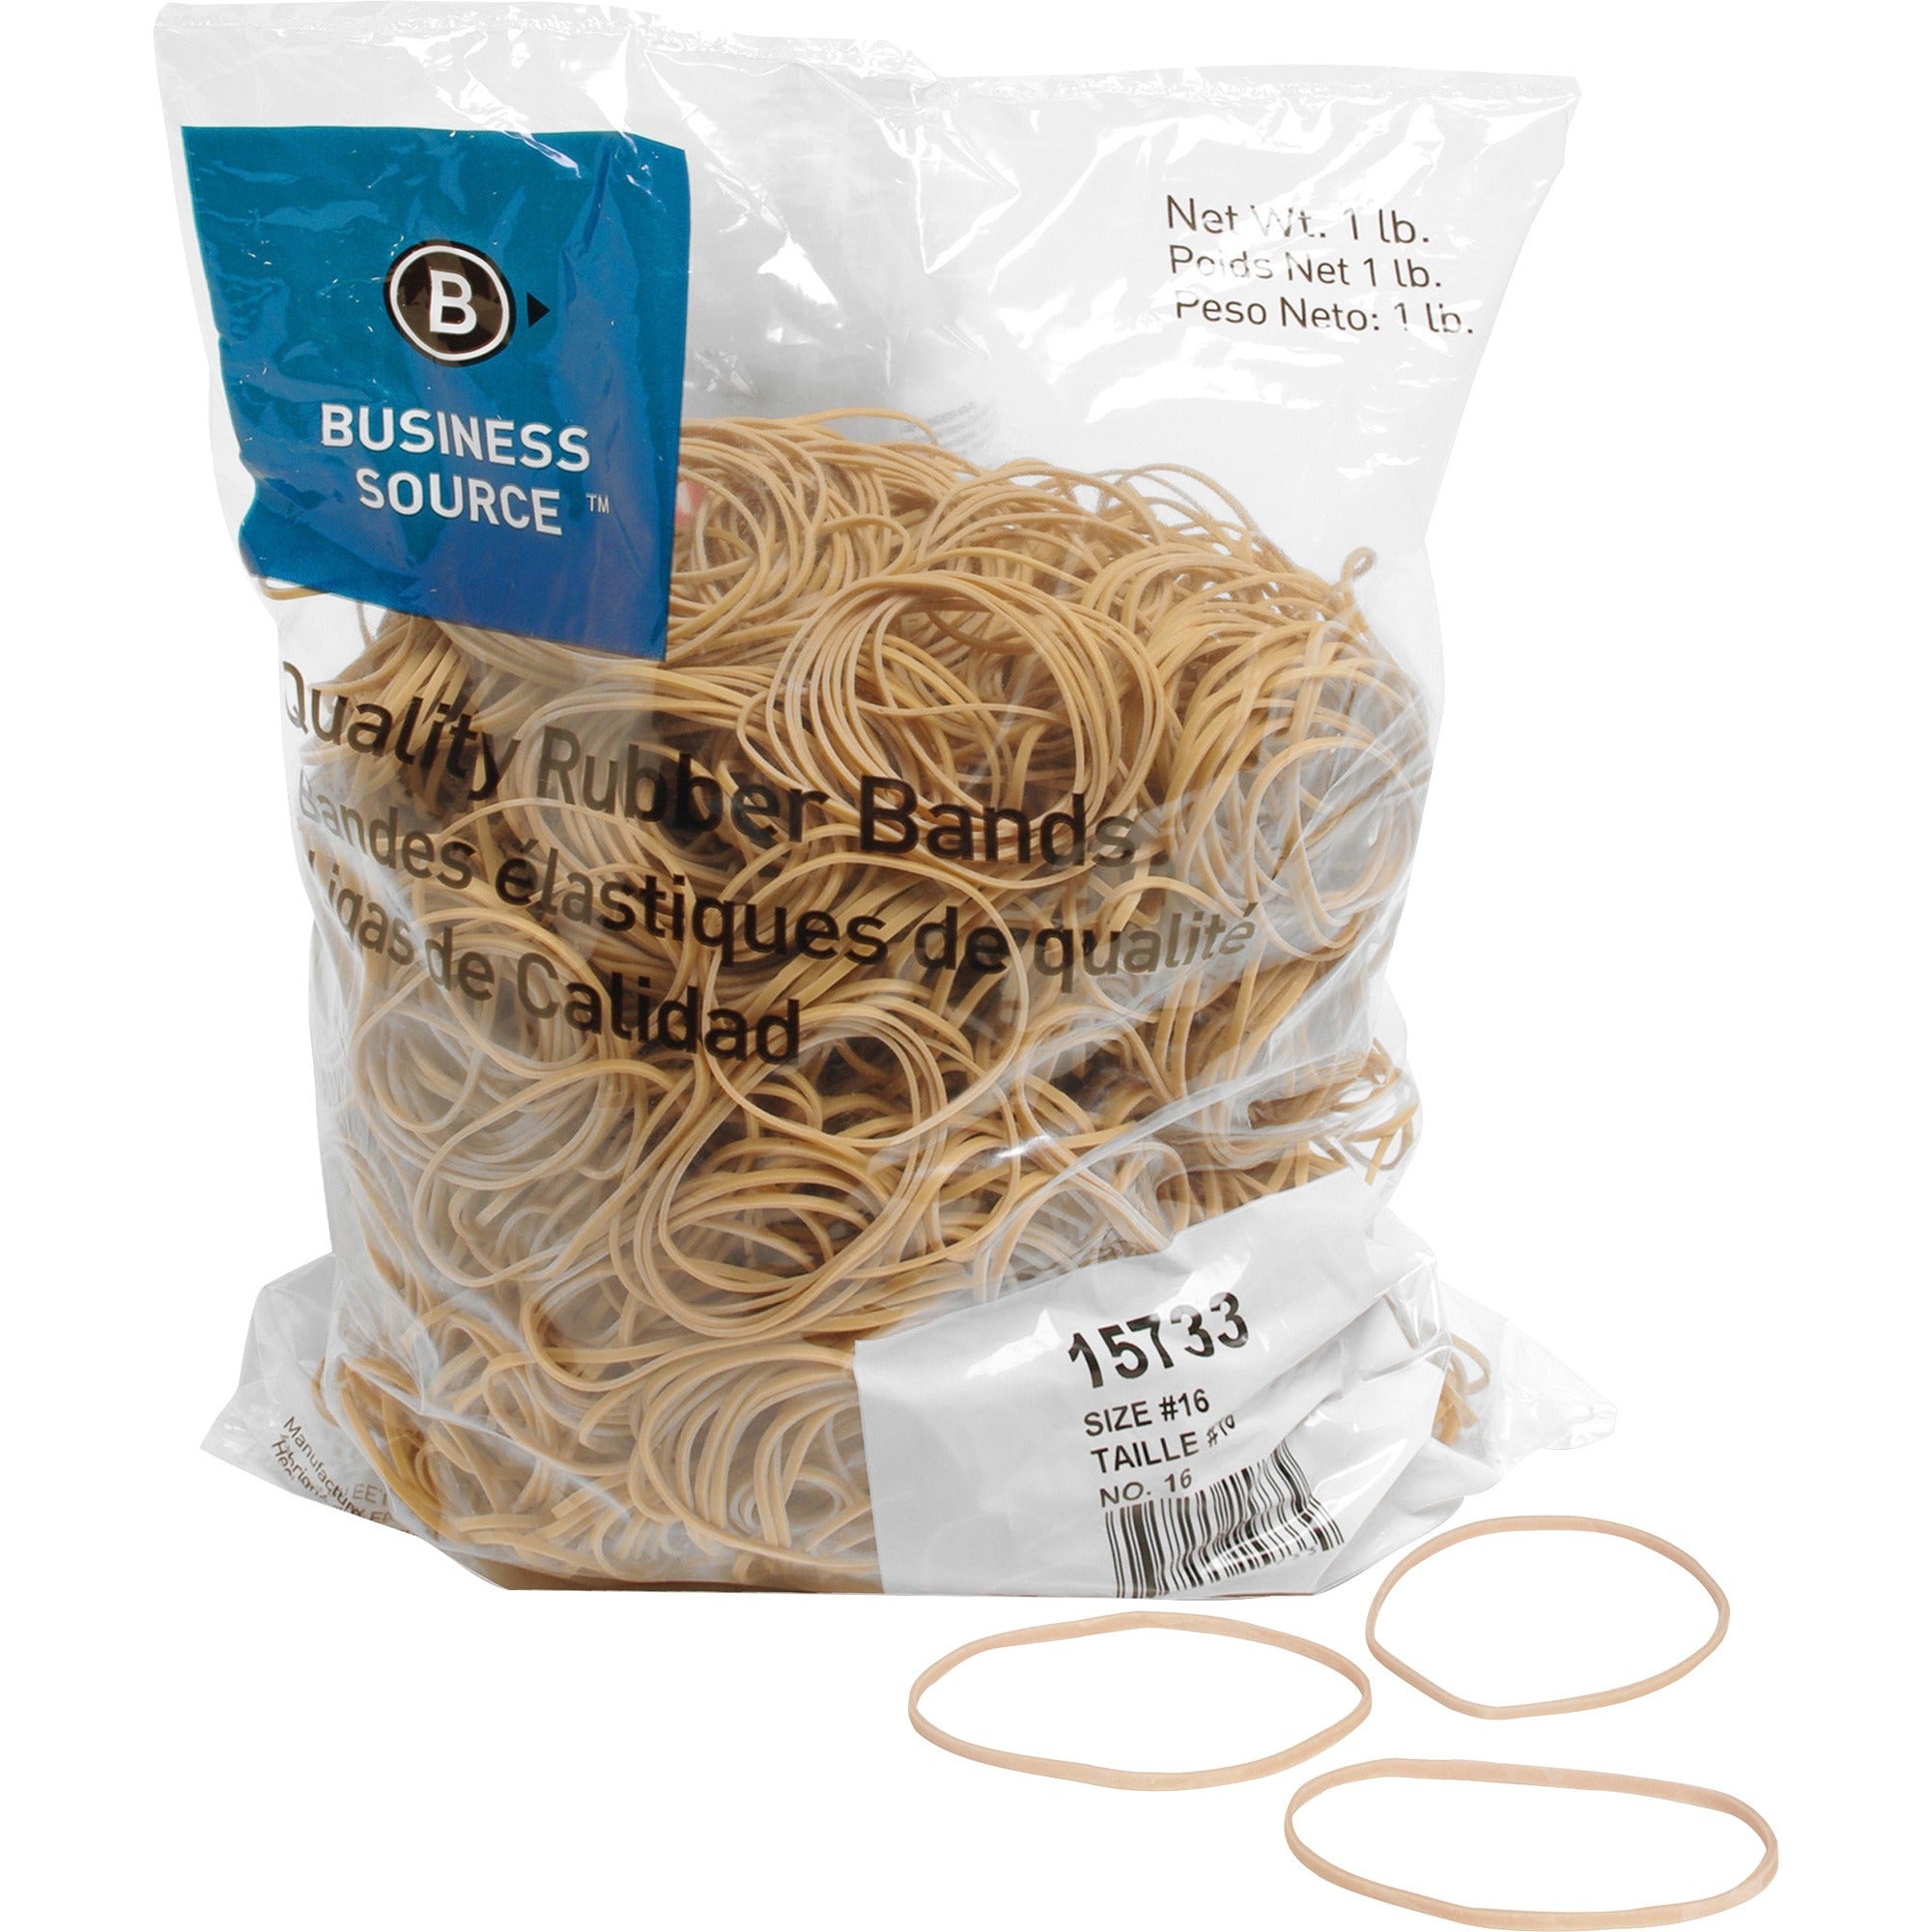 Business Source Quality Rubber Bands - Size: #16 - 2.5" Length x 0.1" Width - Sustainable - 1800 / Pack - Rubber - Crepe - 